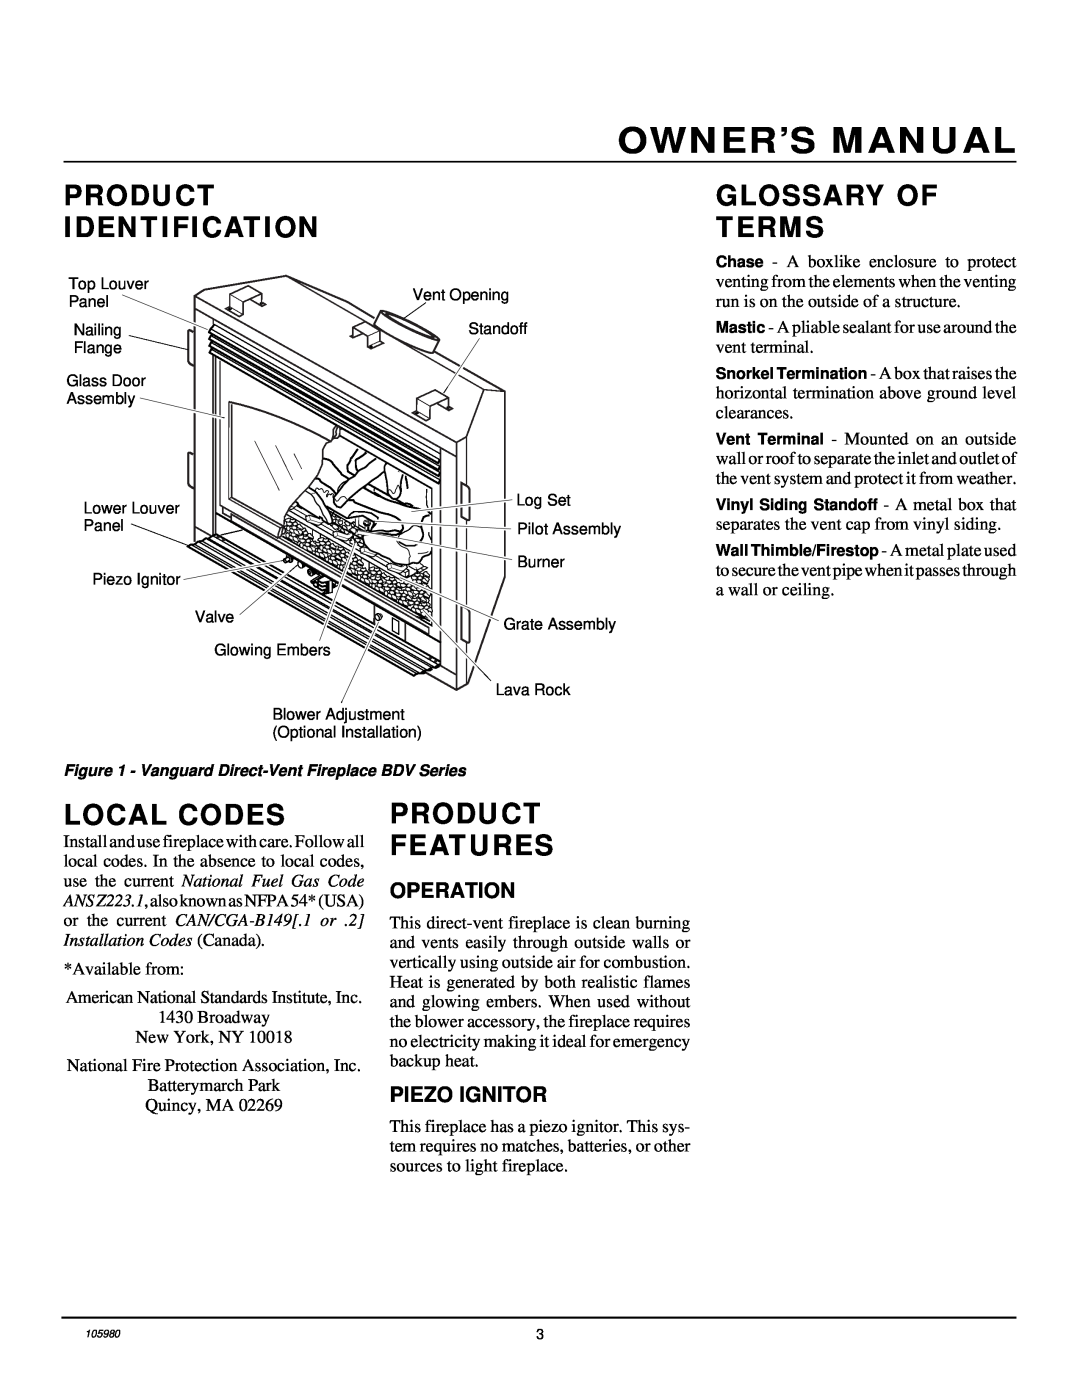 Desa BDV34NA, BDV34PA Product Identification, Glossary Of Terms, Local Codes, Product Features, Operation, Piezo Ignitor 